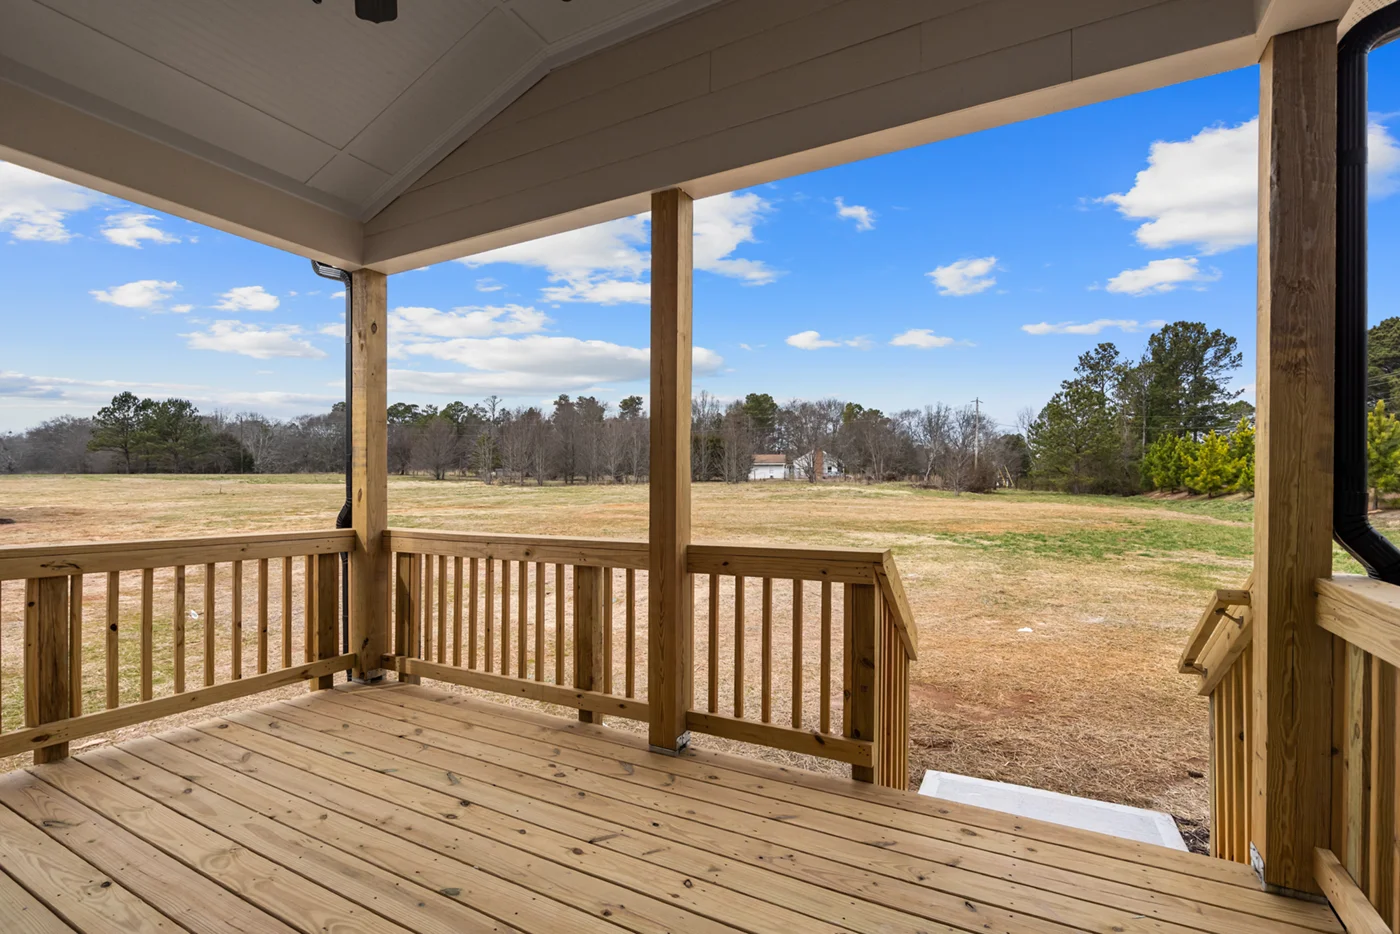 1060 Stonewood Field Rd. Watkinsville, GA | Stonewood Community | Single-Family Home for Sale by SR Homes | Stonewood Community | Single-Family Home for Sale by SR Homes